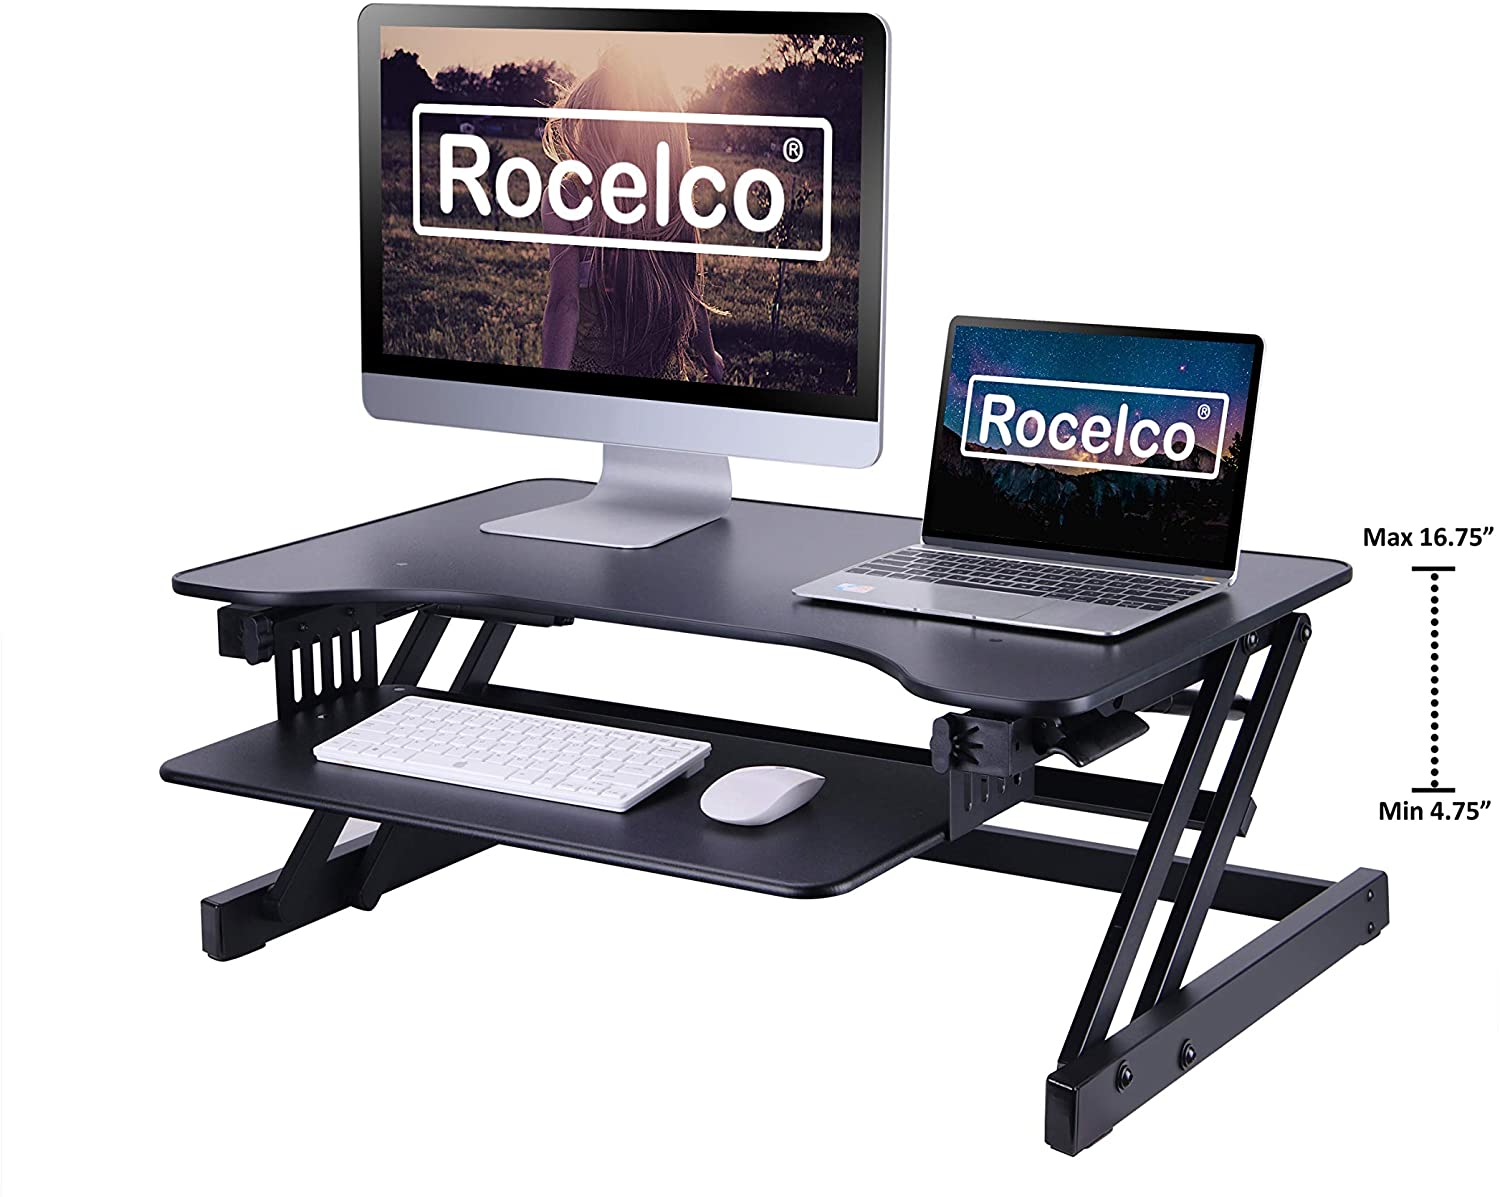 Rocelco 32” Height Adjustable Standing Desk Converter | Quick Sit Stand Up Dual Monitor Riser | Gas Spring Assist Tabletop Computer Workstation | Large Retractable Keyboard Tray | Black (R ADRB)